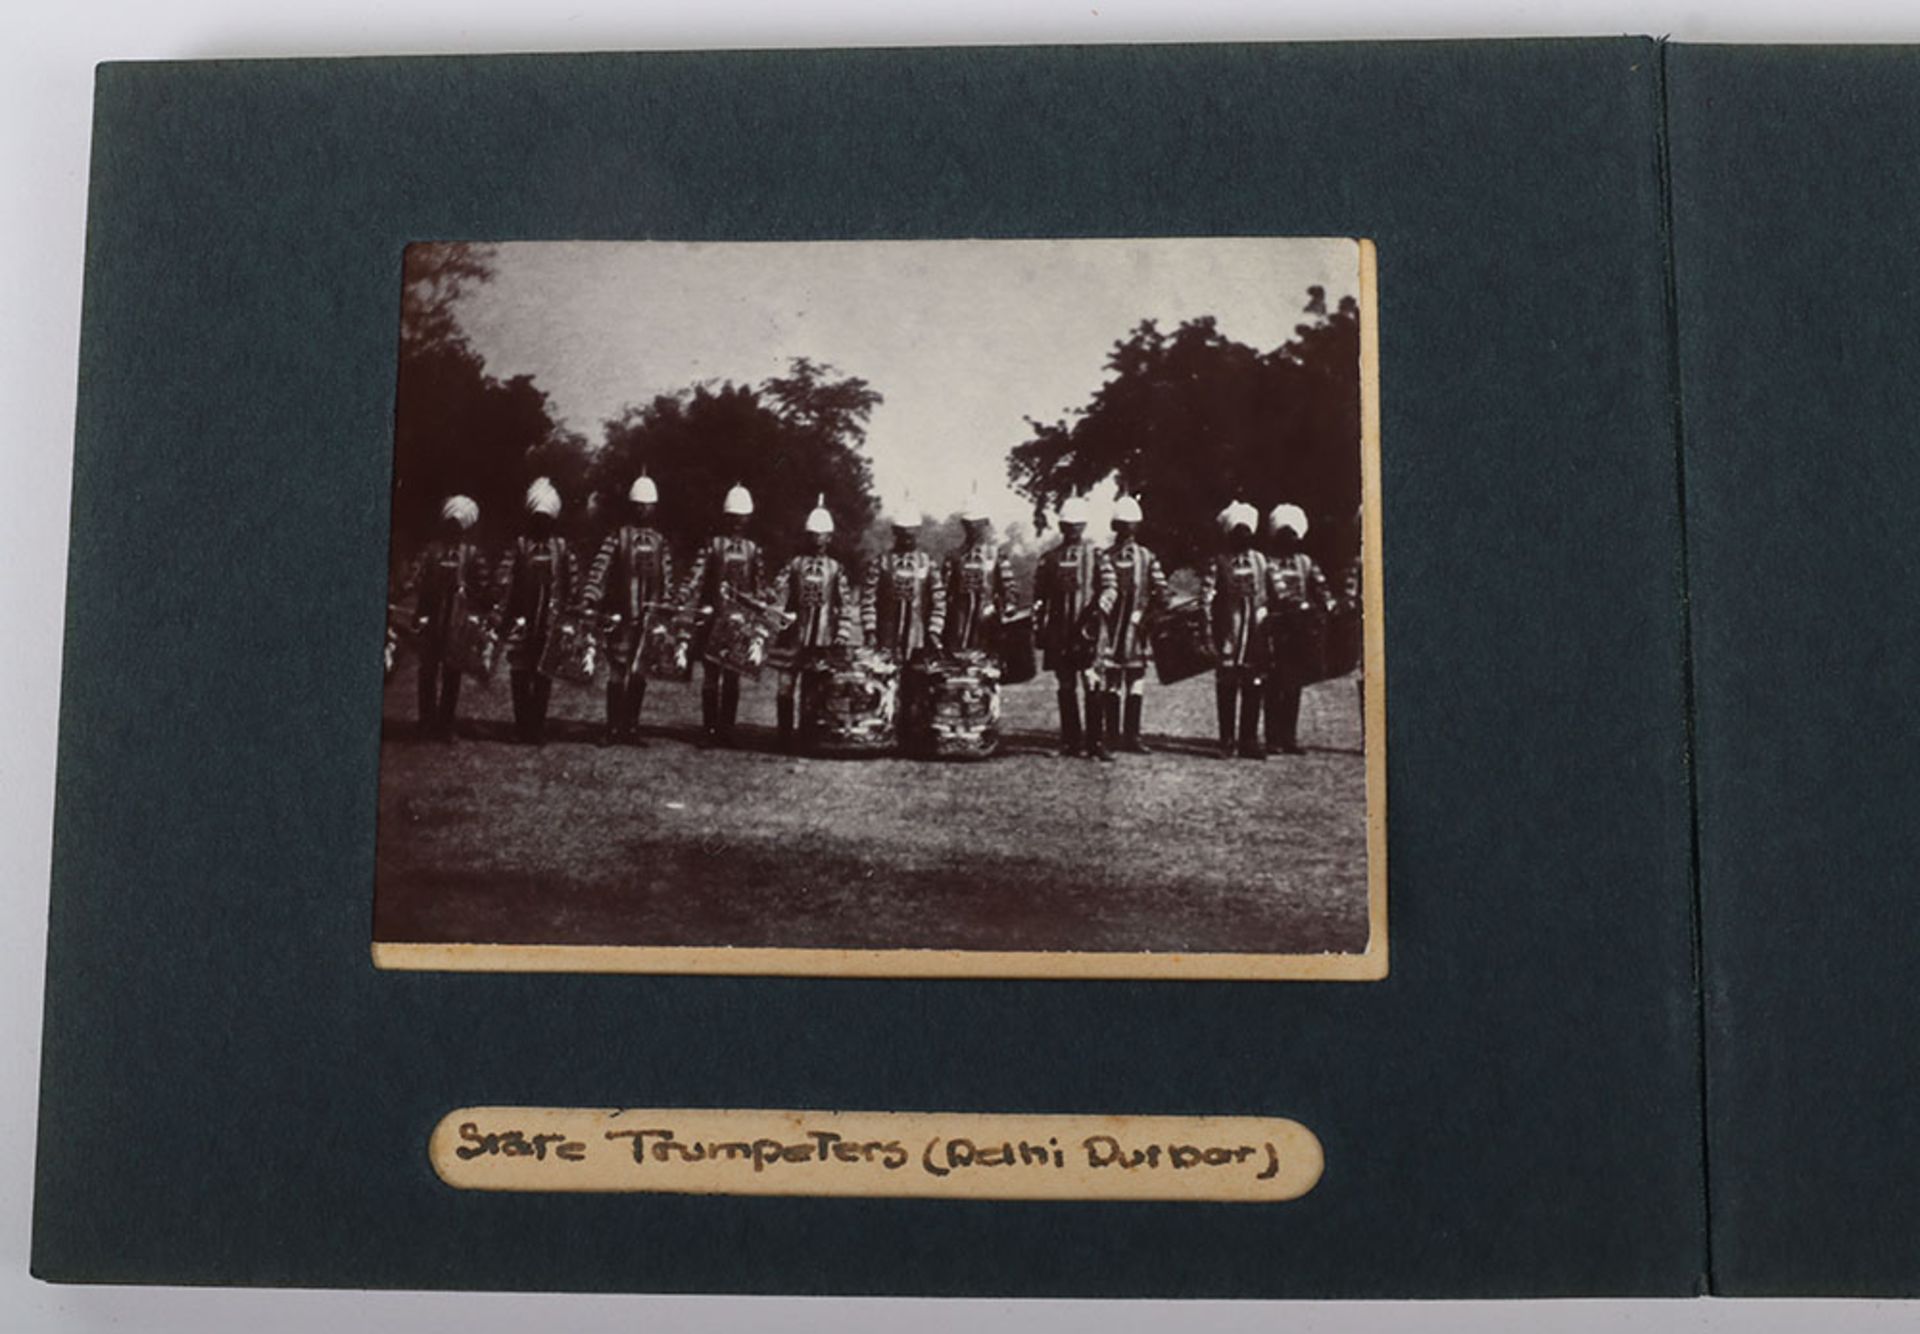 Photograph Album with images of ther Delhi Durbar, troops lining streets, Elephants, sacred cows bel - Image 45 of 48